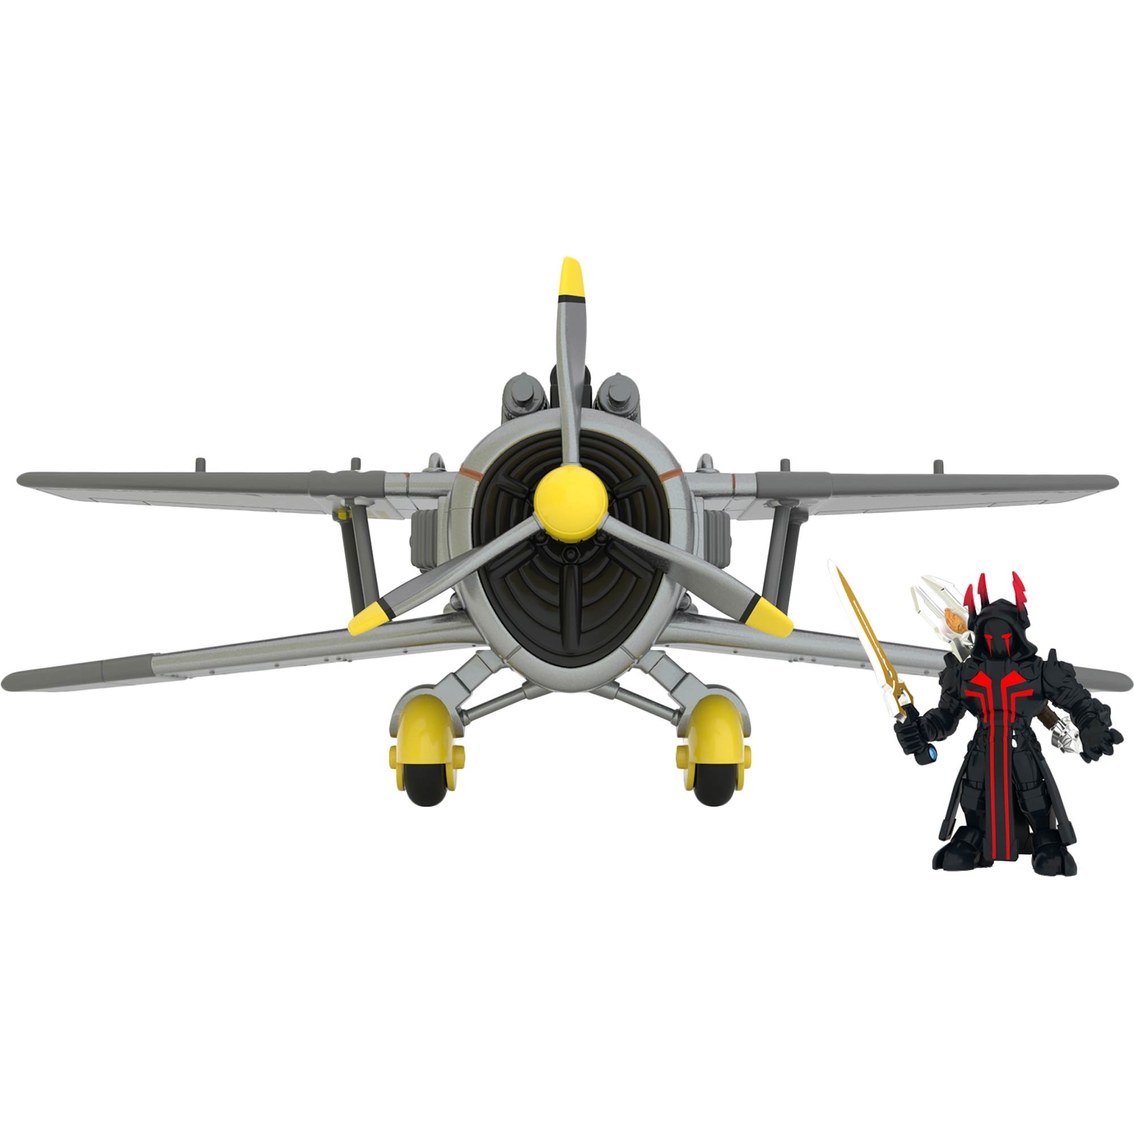 Moose Toys Fortnite Battle Royale Collection X-4 Stormwing Toy Plane - Image 4 of 5